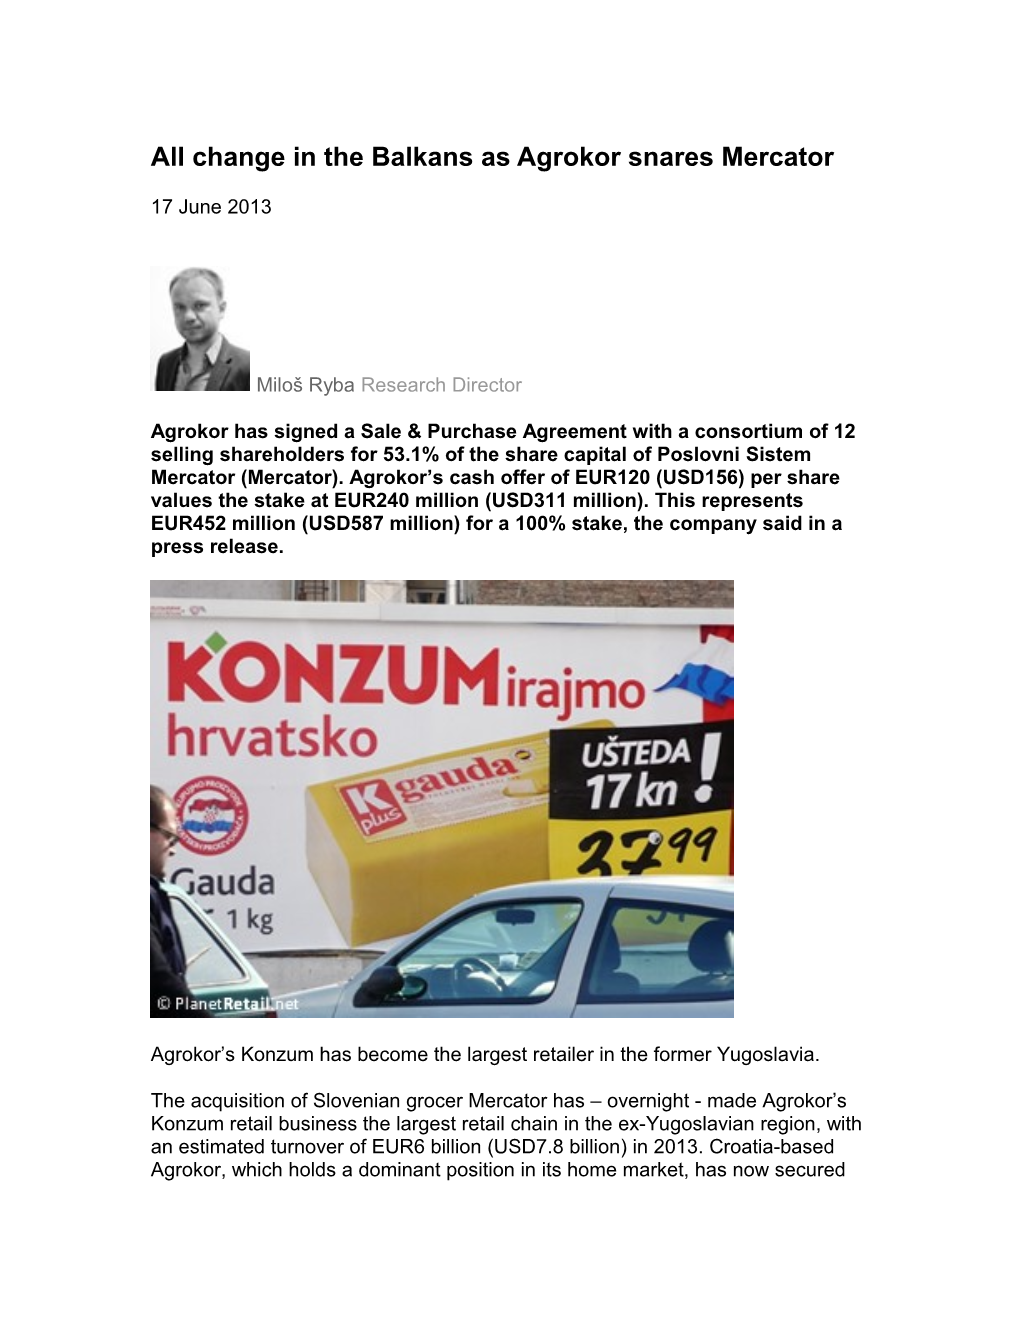 All Change in the Balkans As Agrokor Snares Mercator